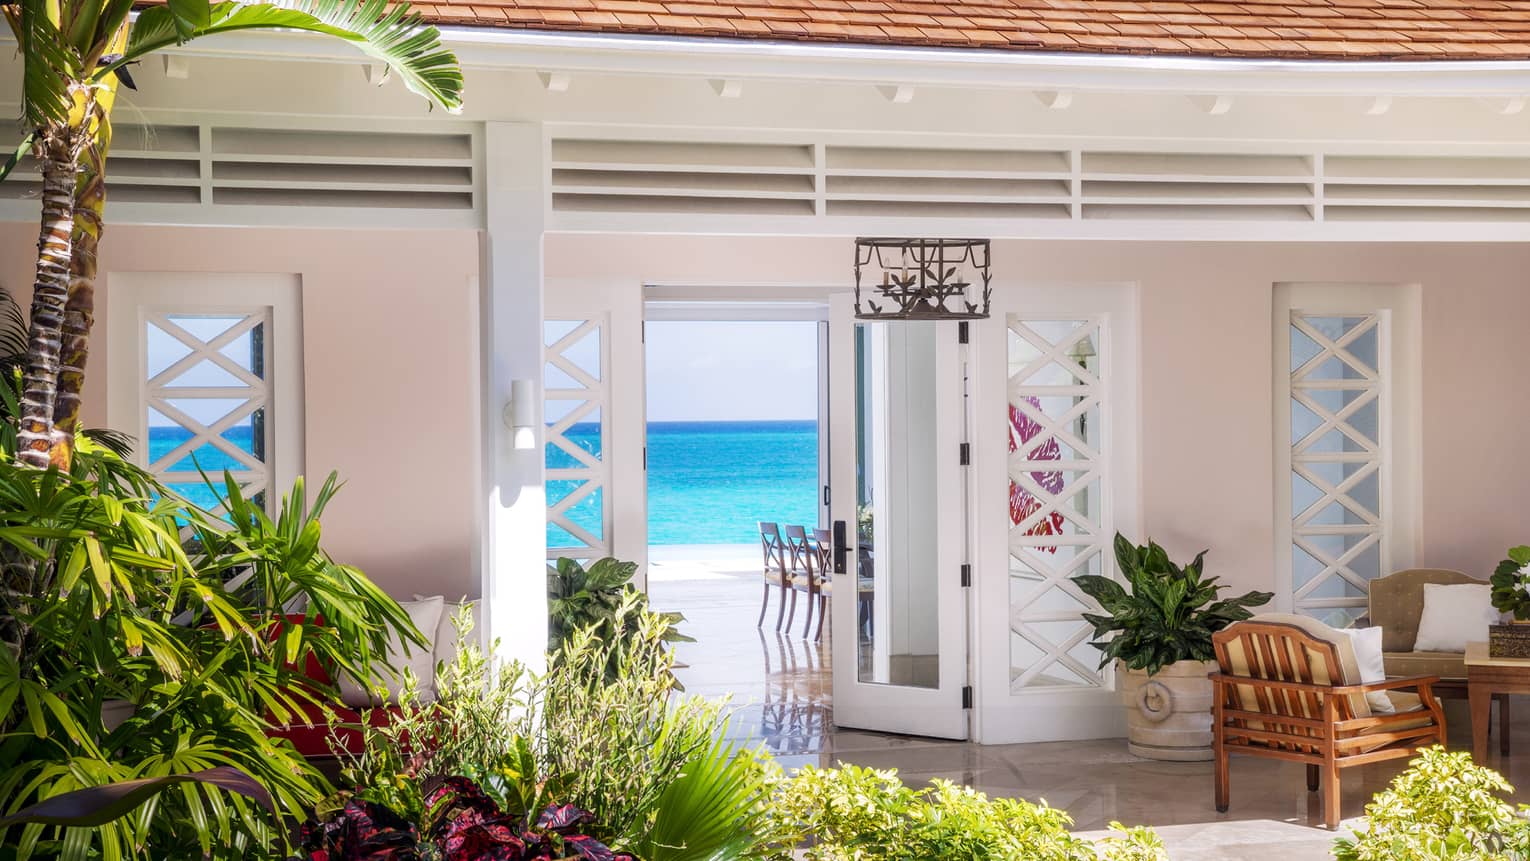 Tropical gardens in front of bright private villa entrance, open door revealing blue ocean in background